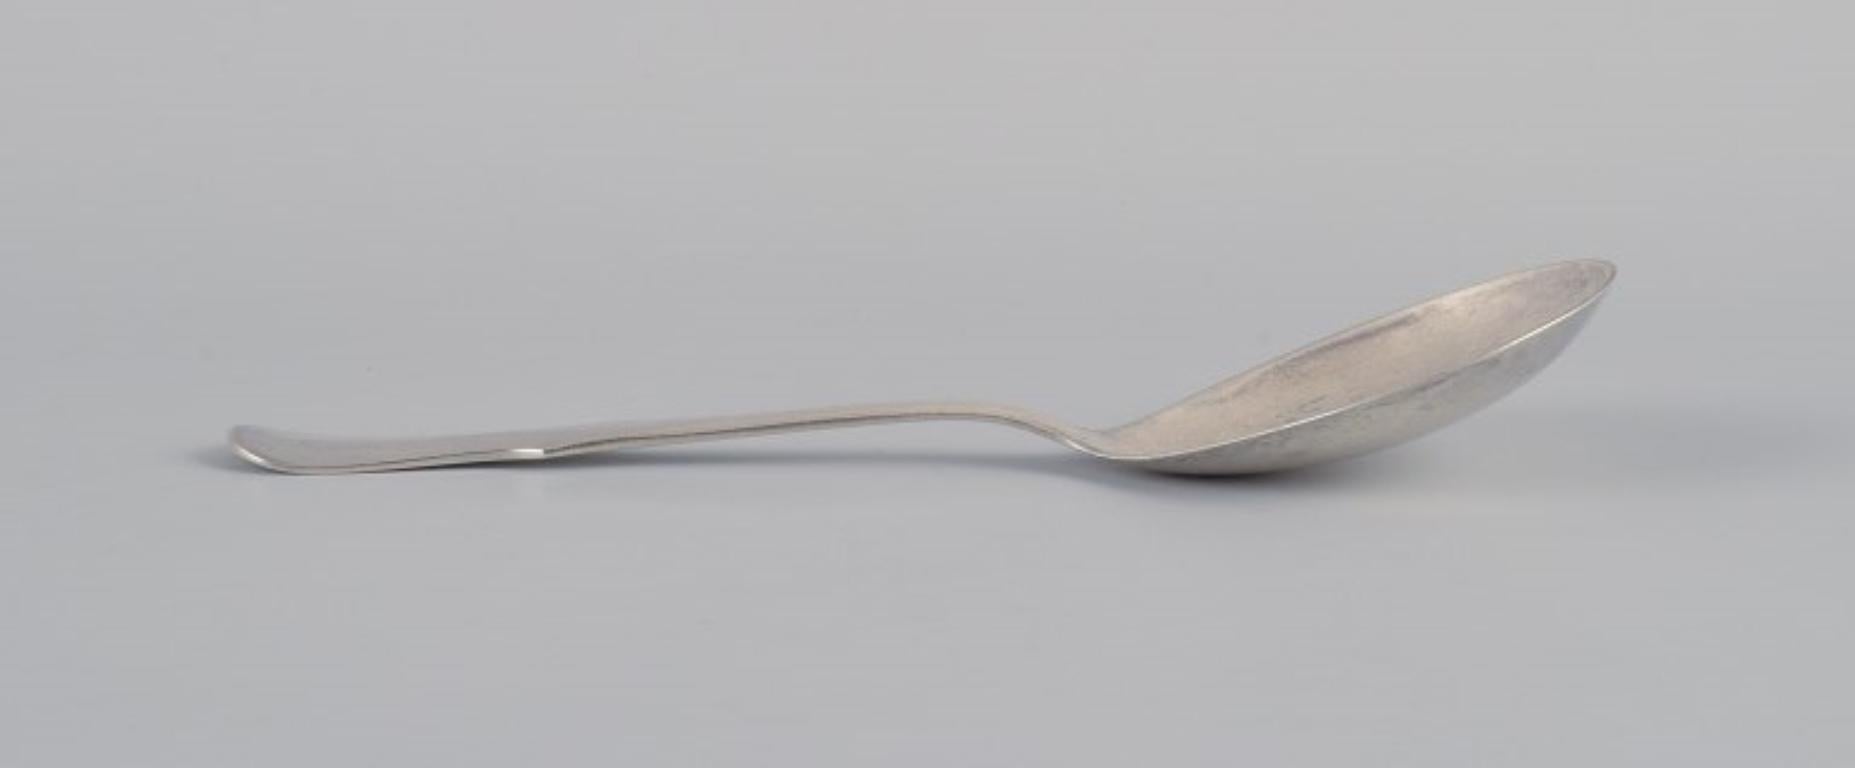 Svend Toxværd, Danish silversmith.
Serving spoon in sterling silver.
1930-1940s.
In excellent condition.
marked.
Dimensions: L 18 x D 5.7 cm.